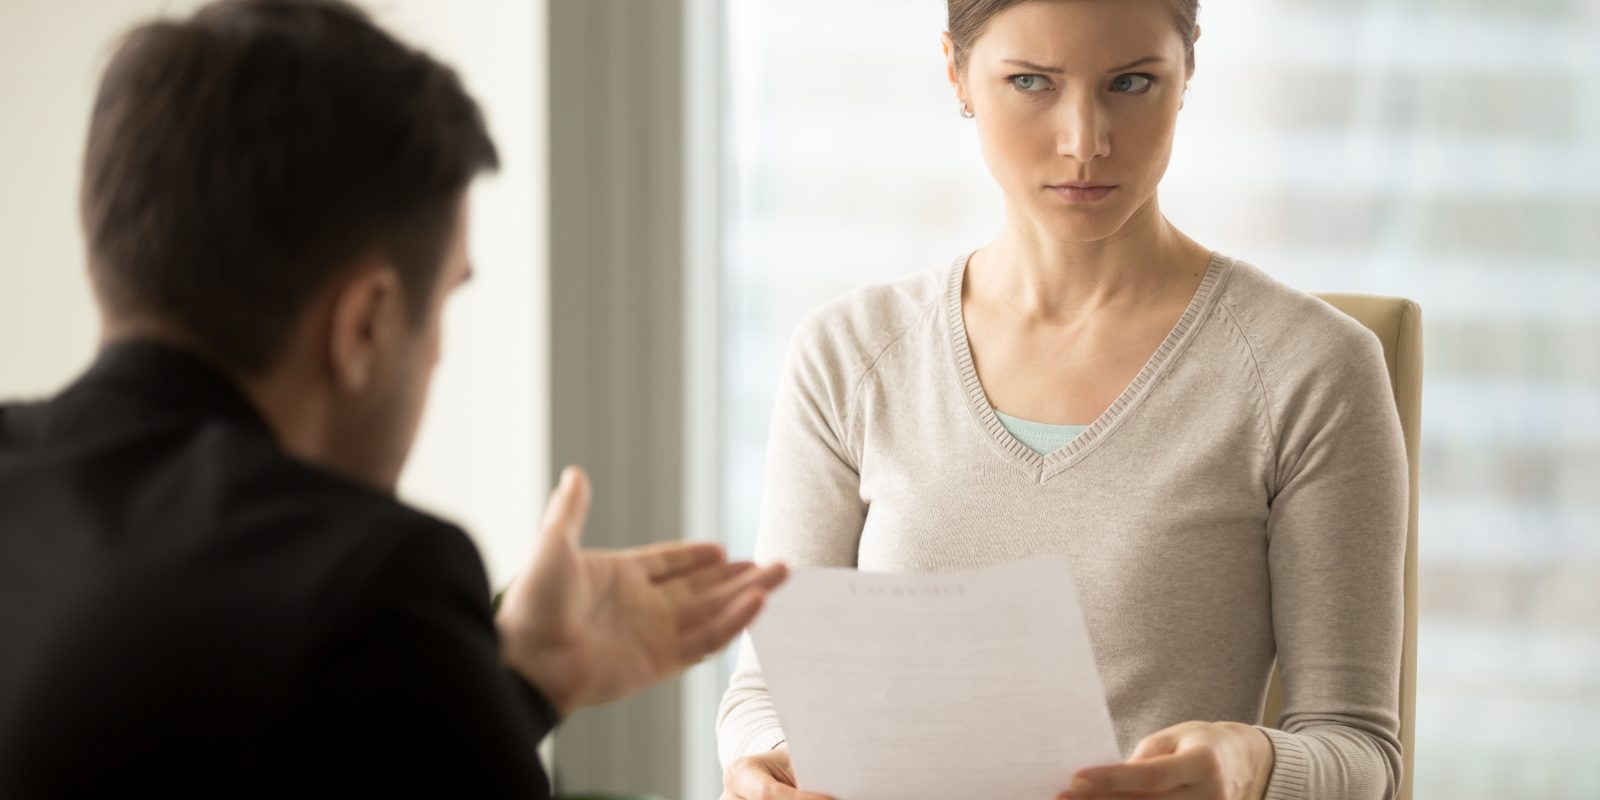 Deciphering the Nuances: Signs Your Interview Might Have Gone Bad and What They Mean